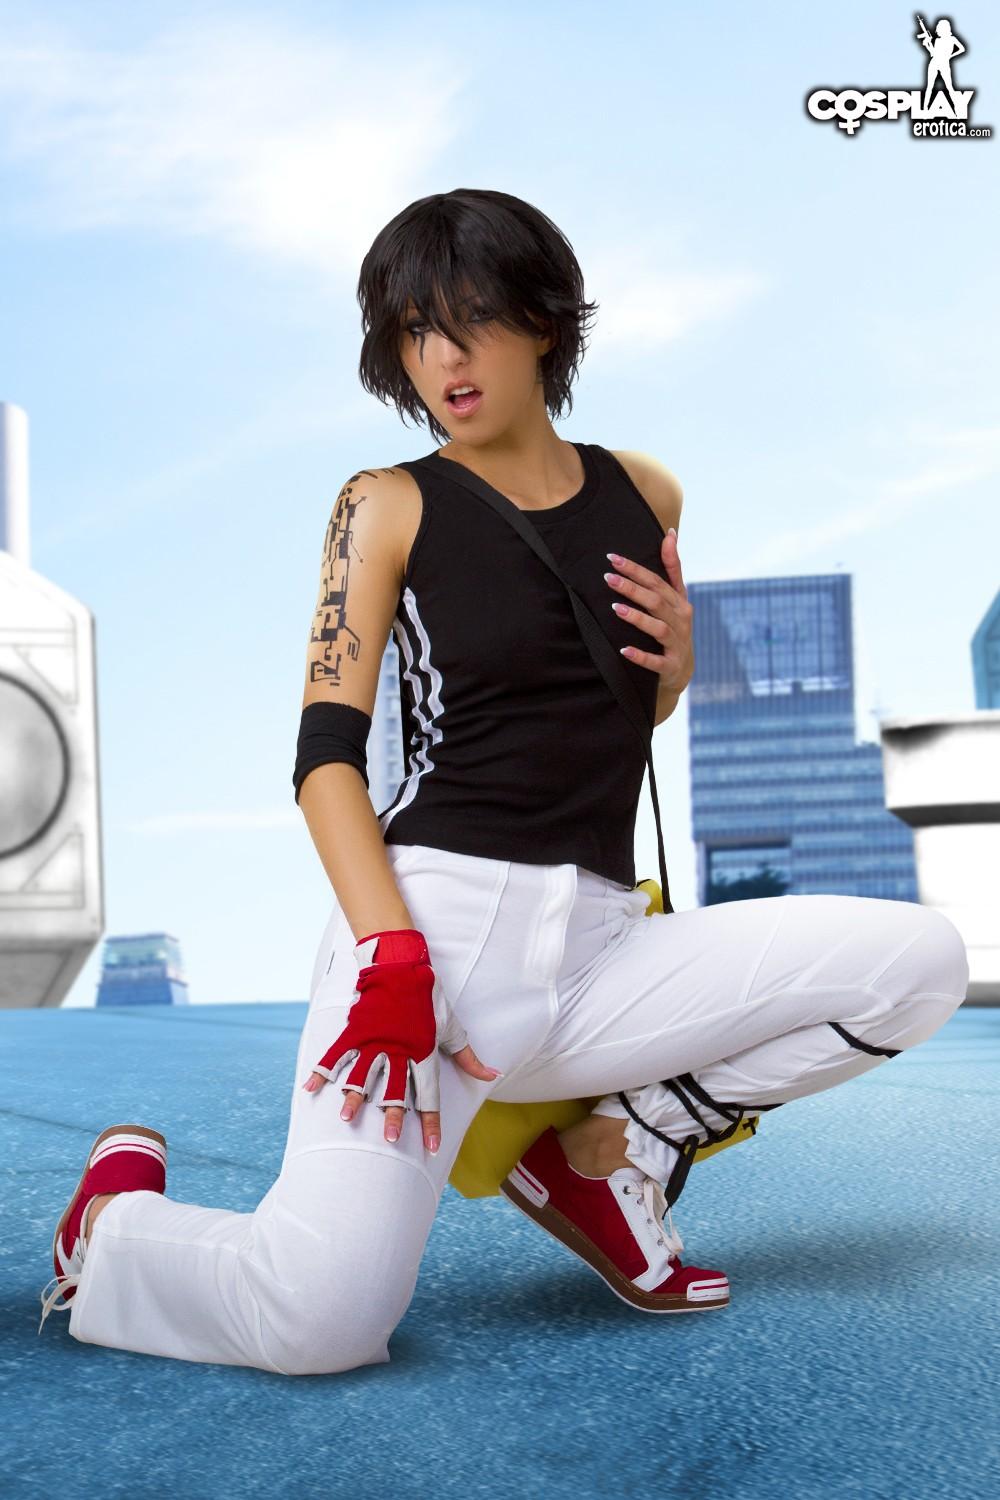 Sexy cosplay girl Anne poses as Faith from Mirror's Edge #53248650